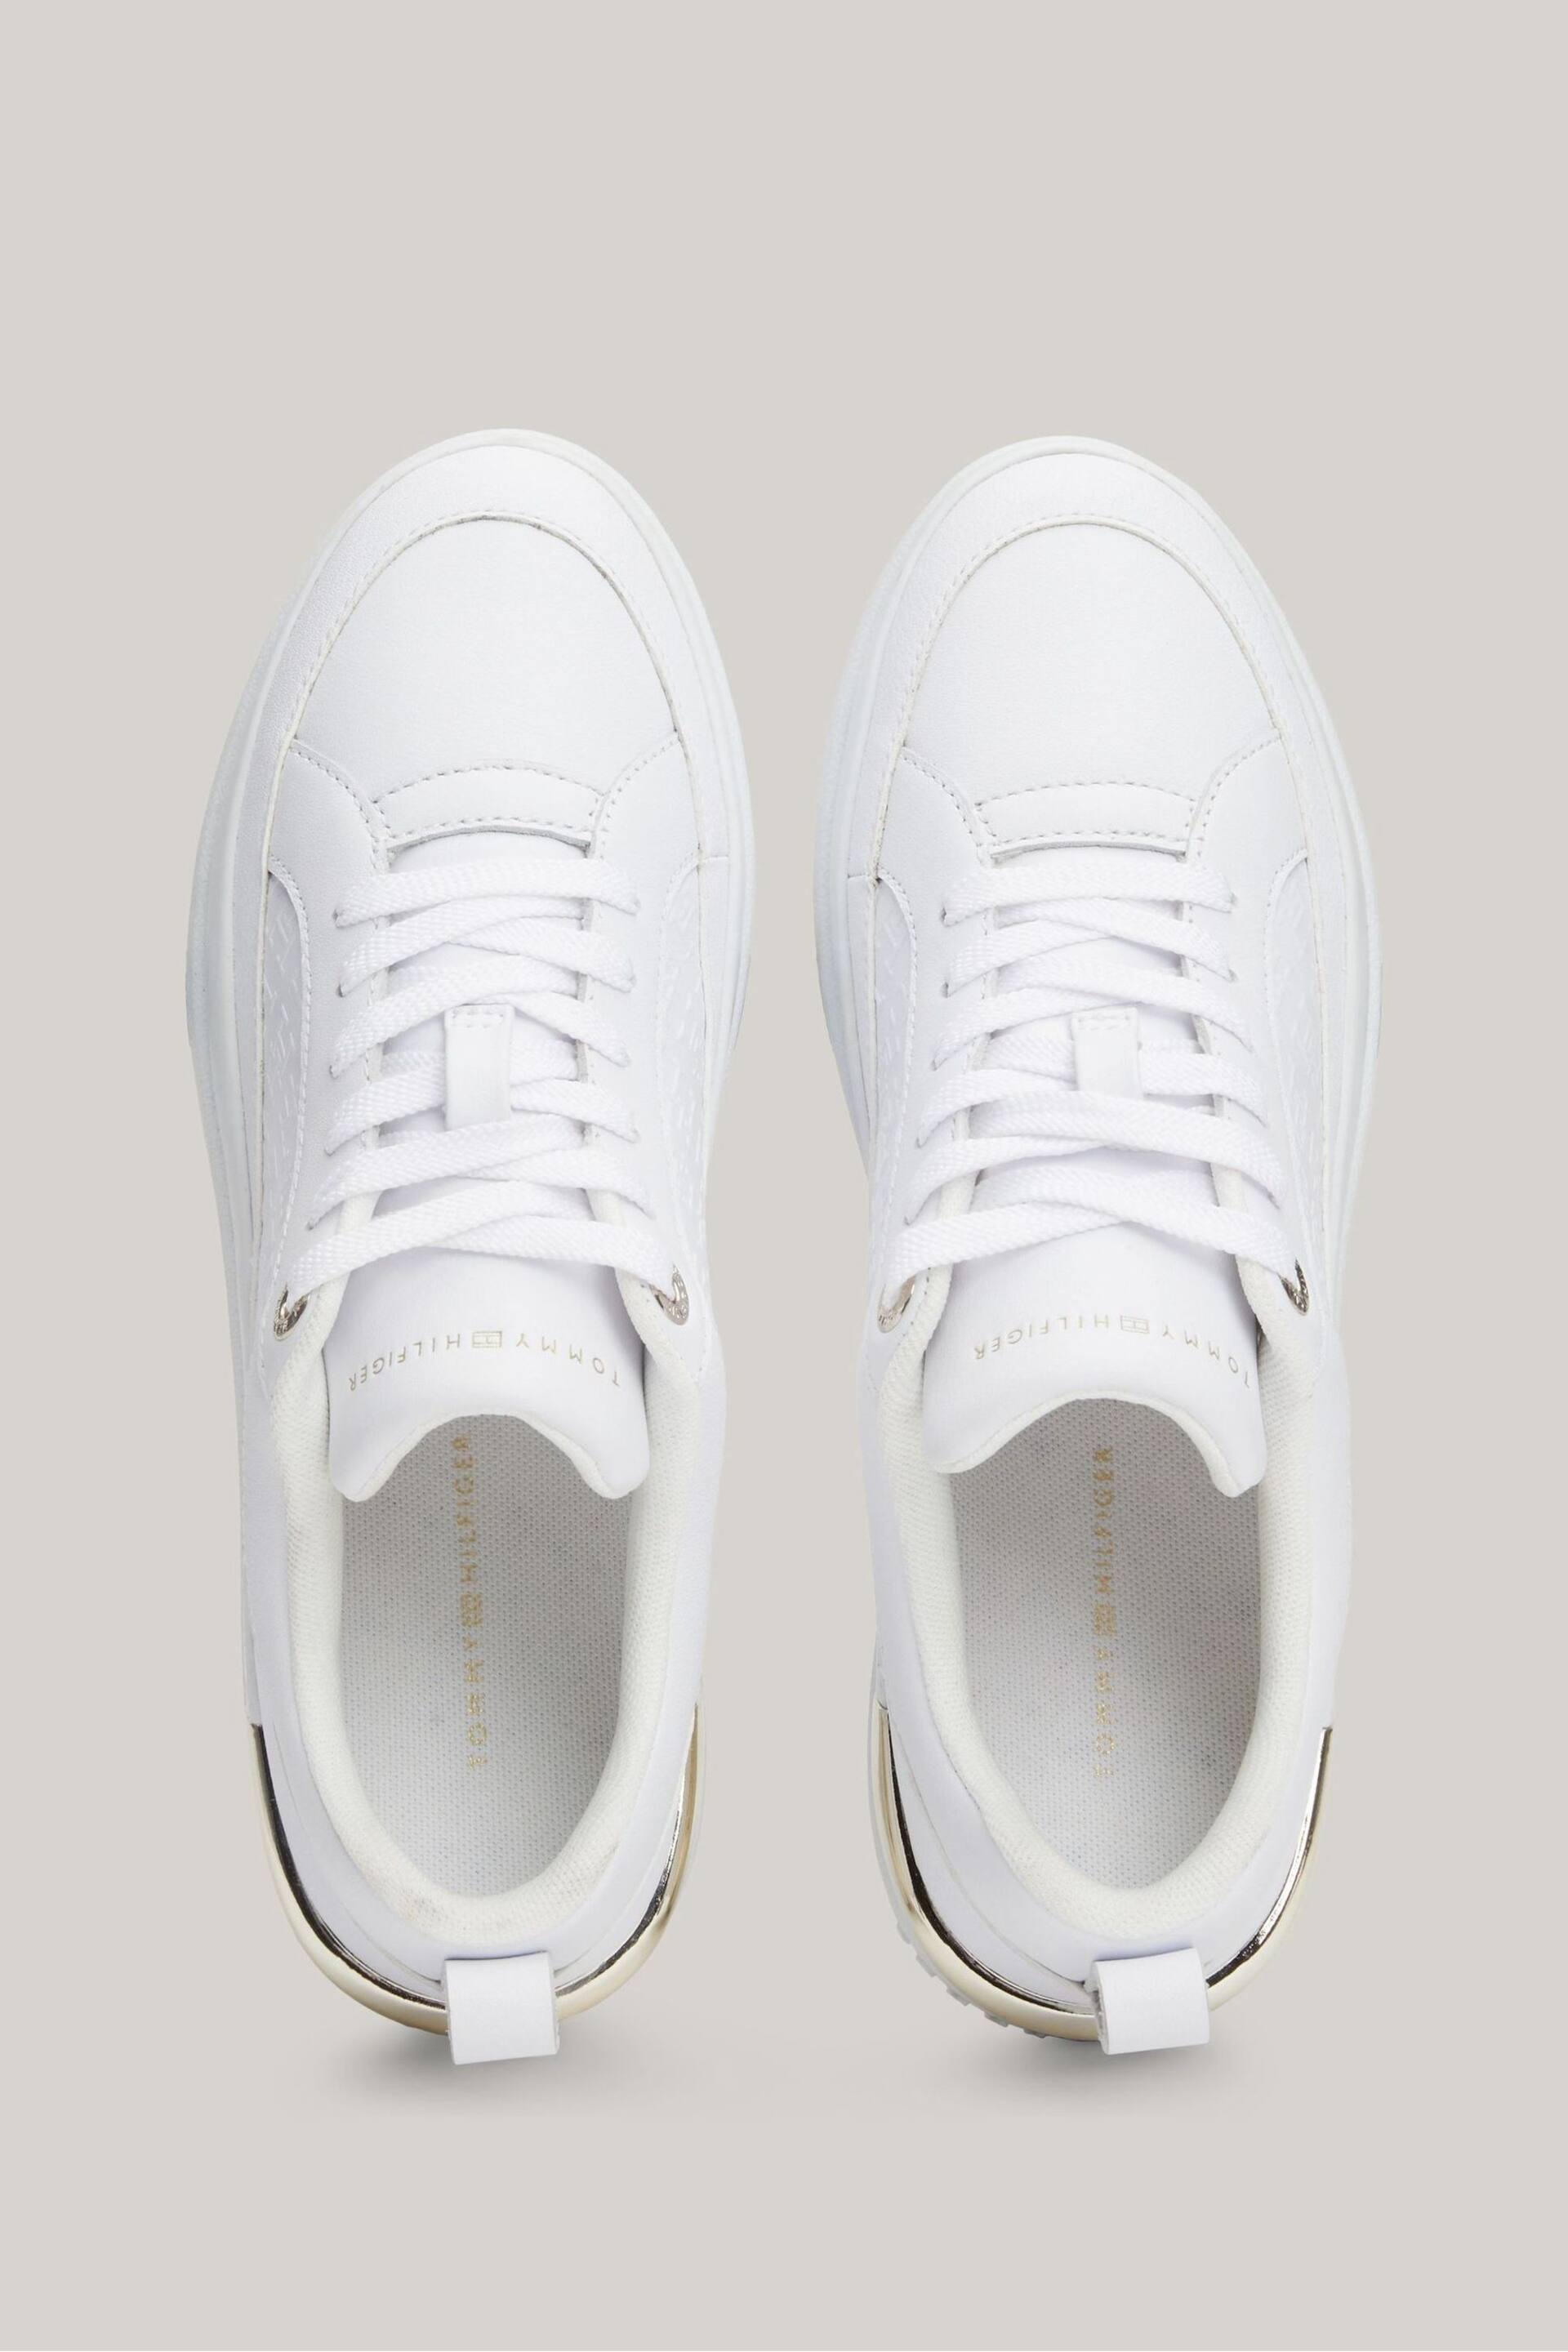 Tommy Hilfiger Lux Court White Sneakers - Image 3 of 5